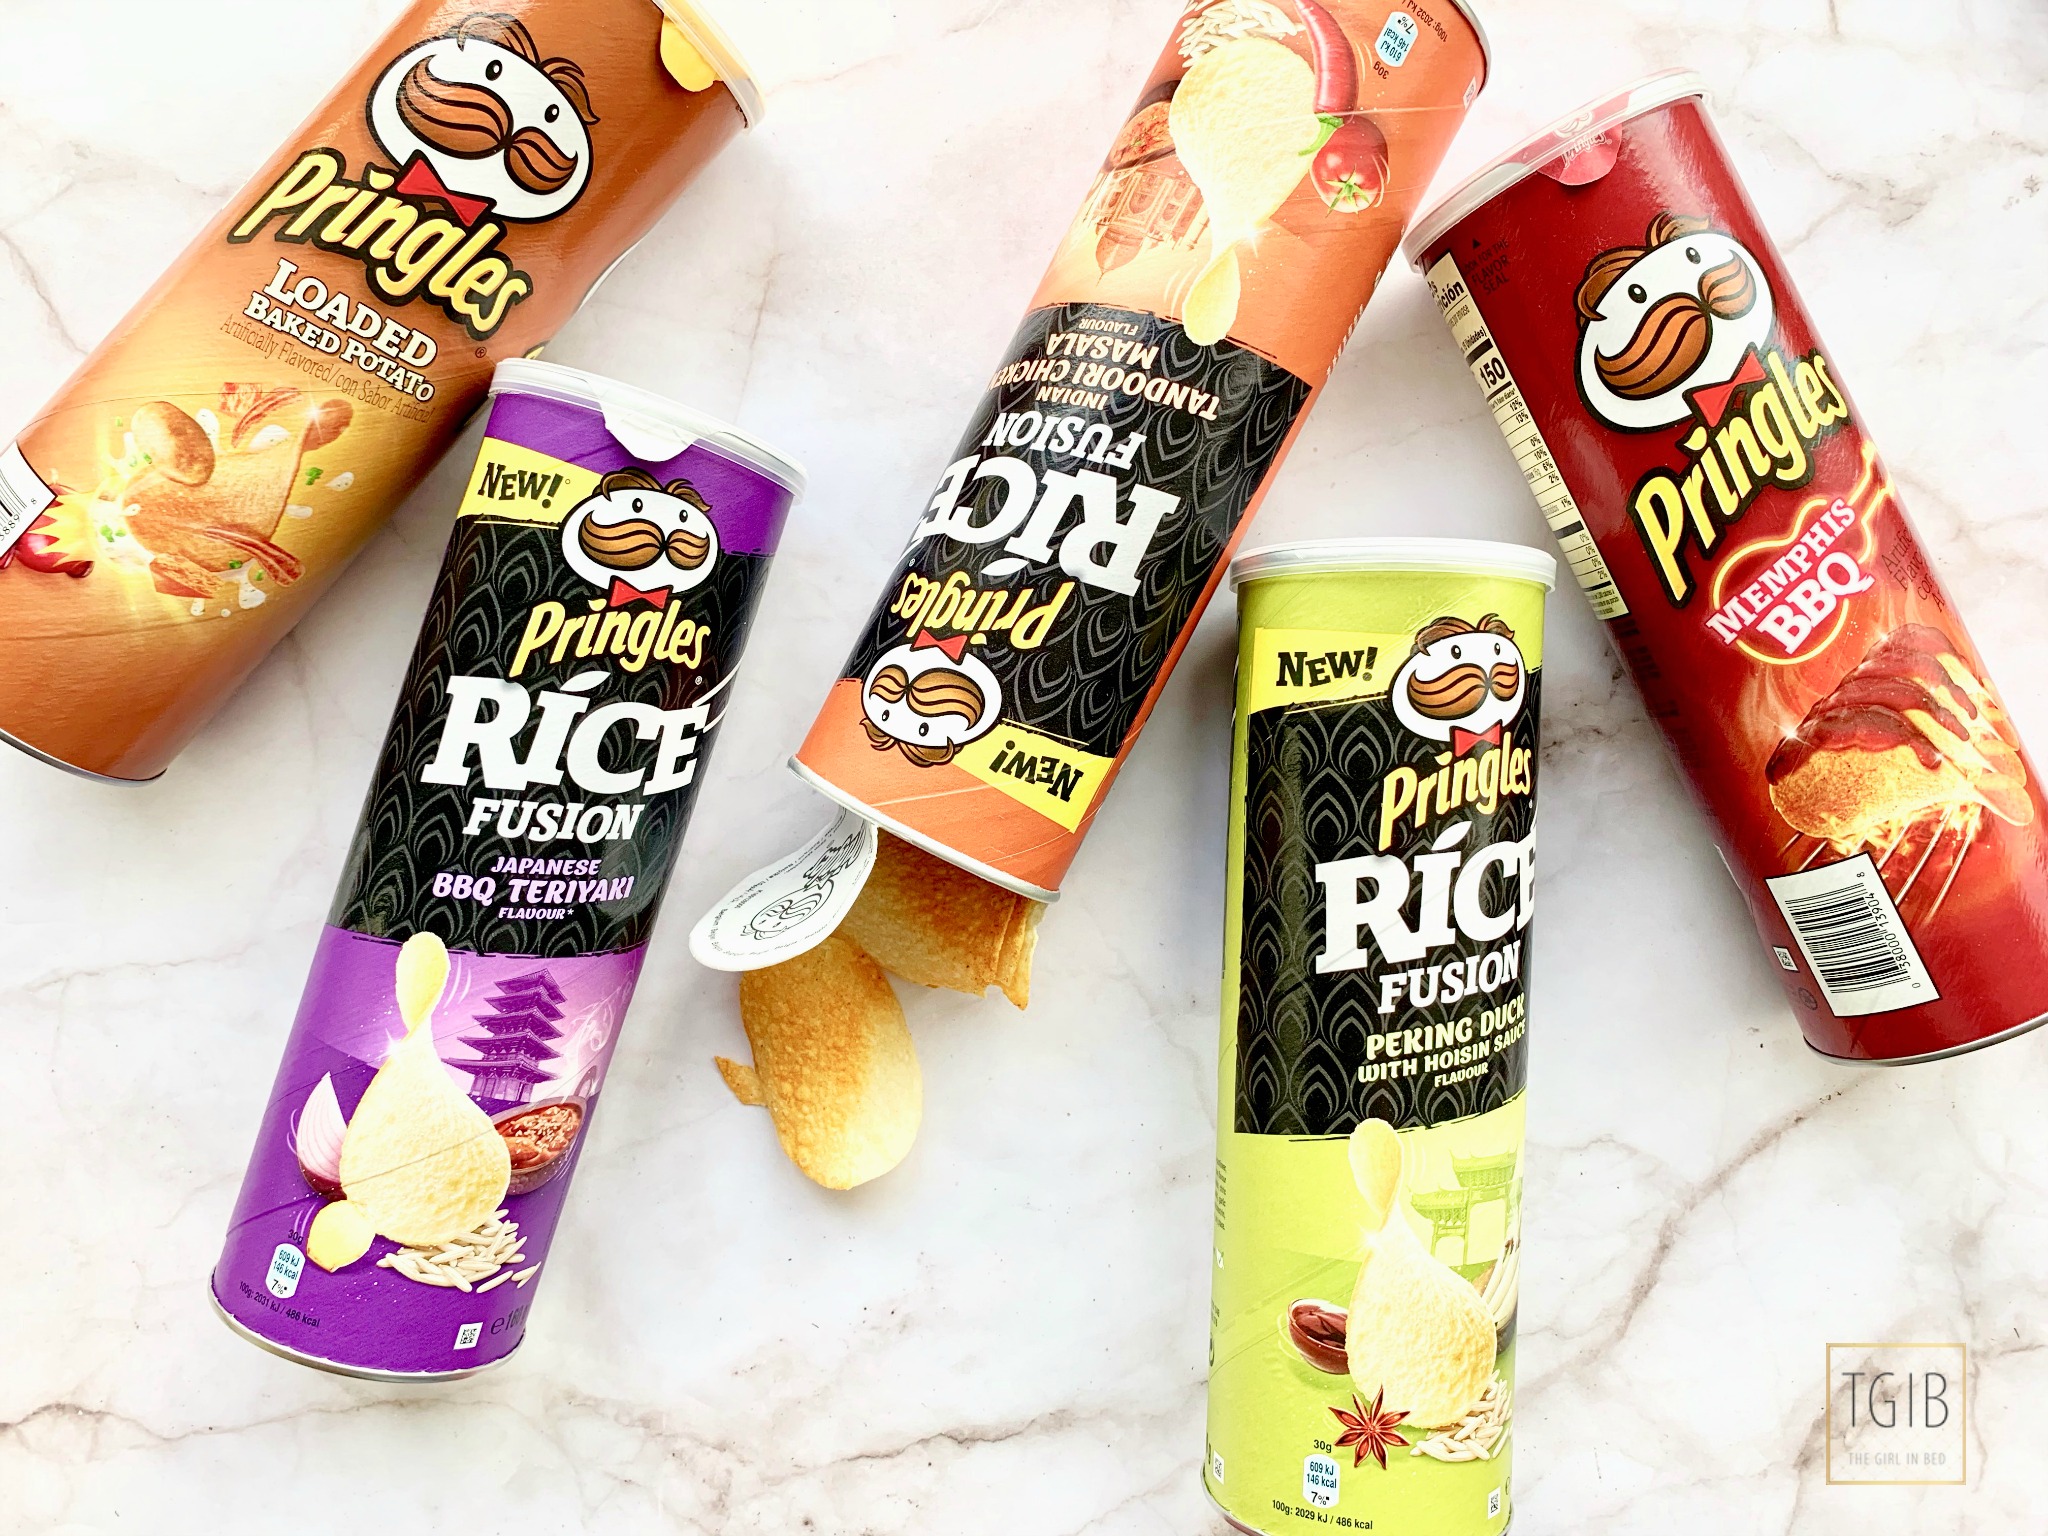 5 different kinds of Pringles